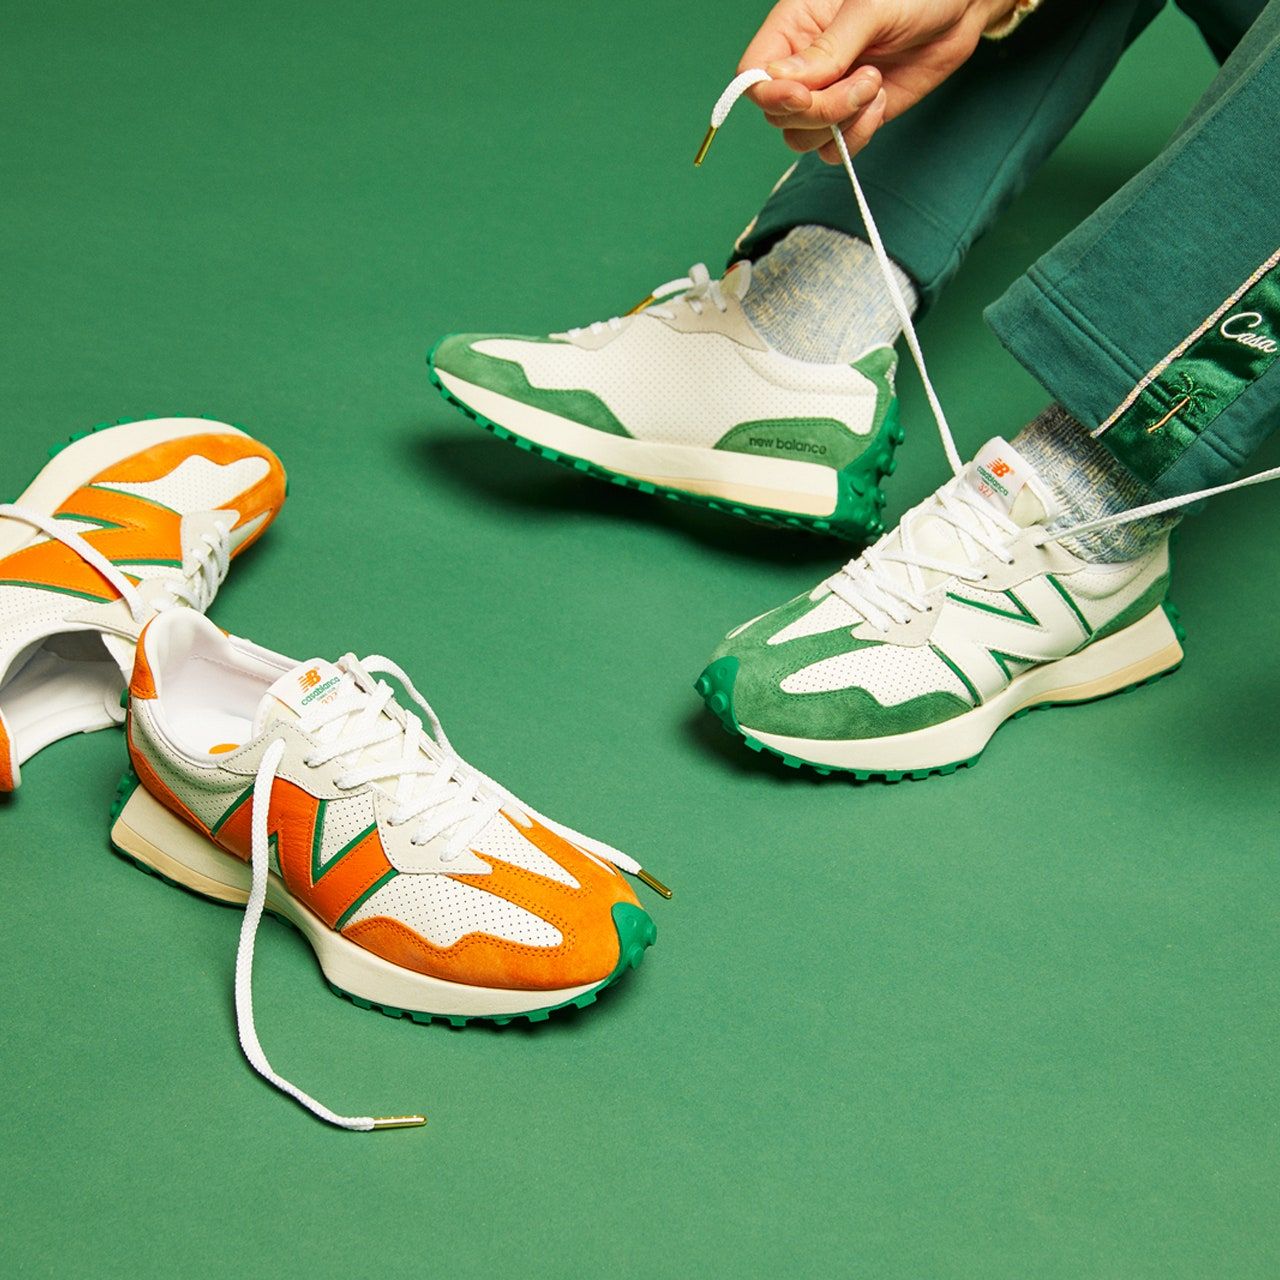 A person lacing up a pair of white, orange and green sneakers - New Balance